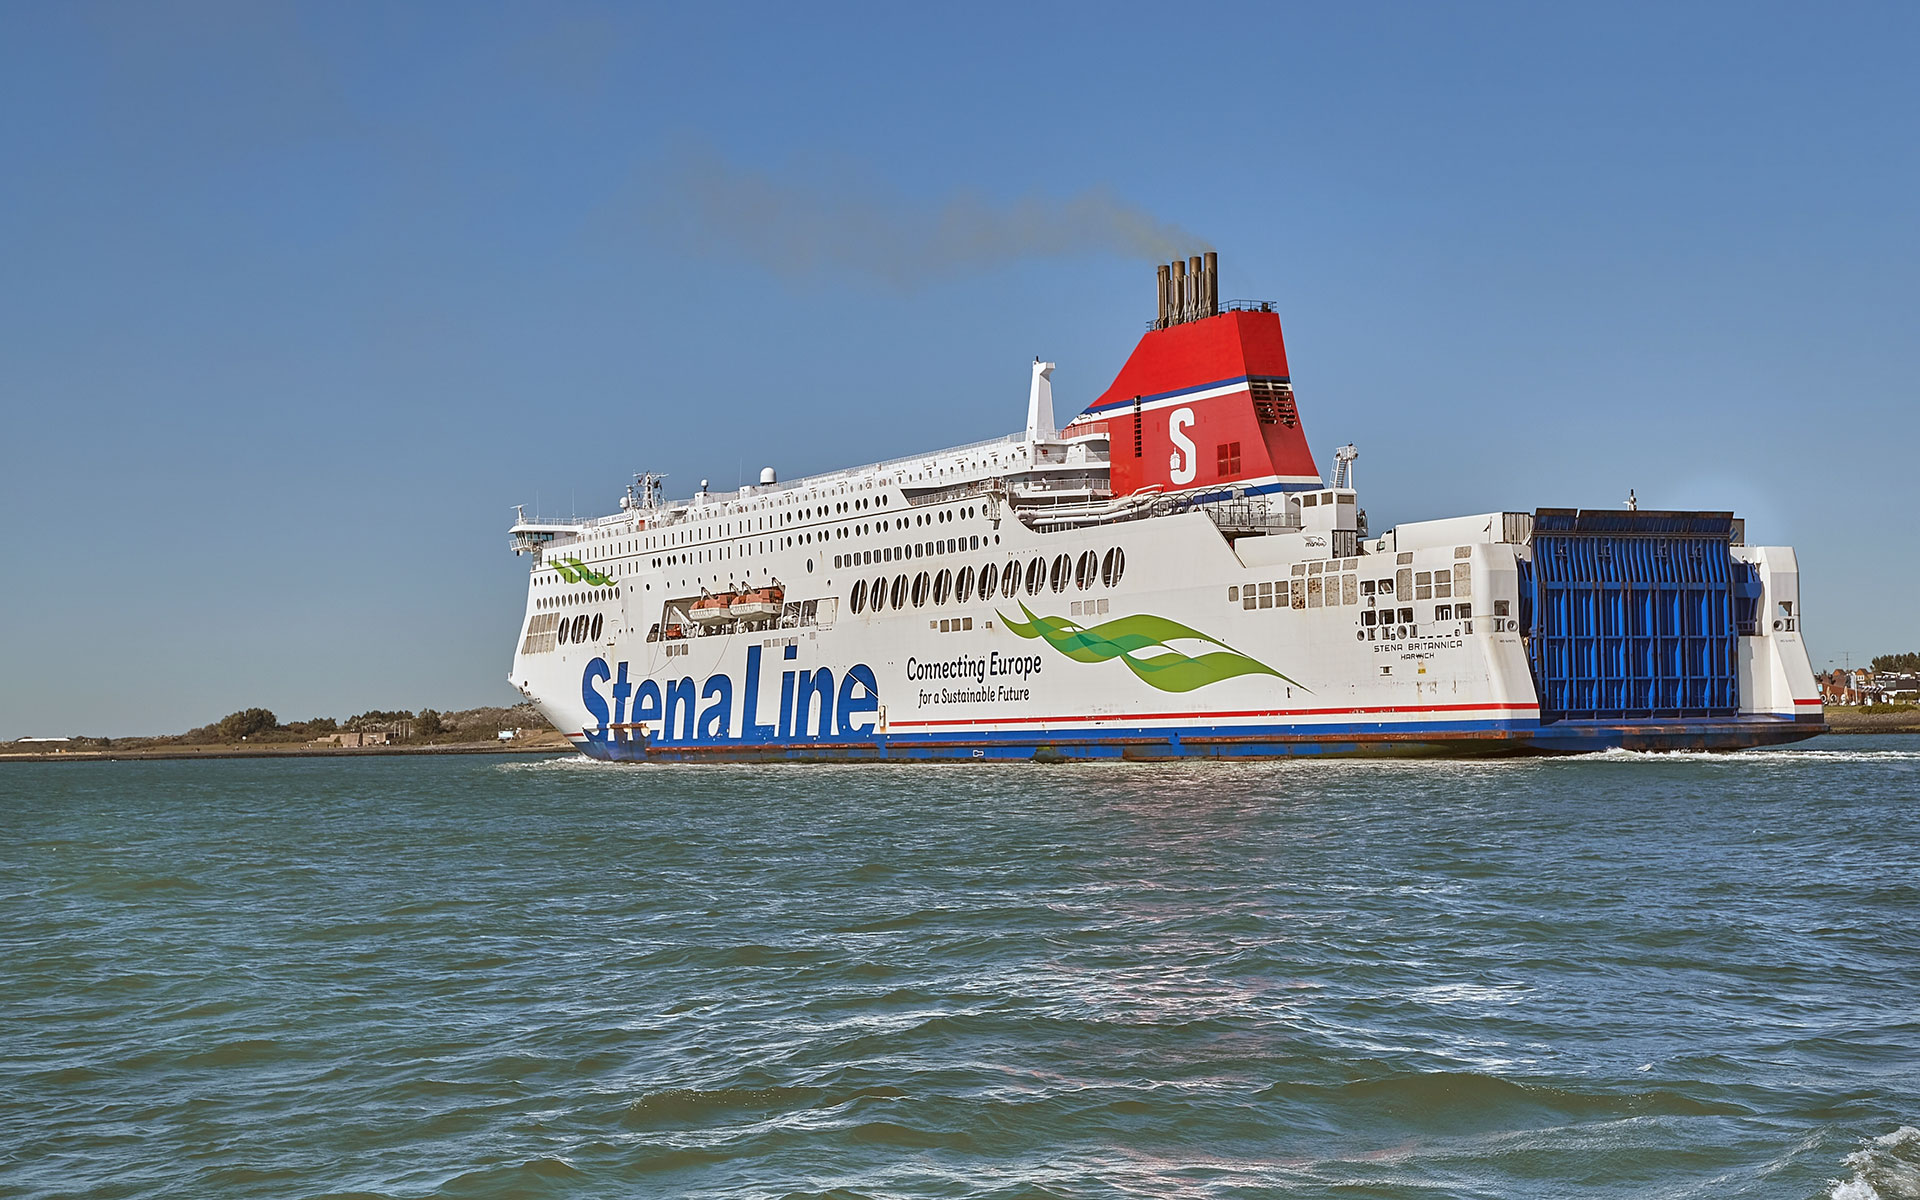 The Stena Britannica happily still takes foot passengers on the crossing between Hoek van Holland and Harwich (photo © Péter Gudella / dreamstime . com)